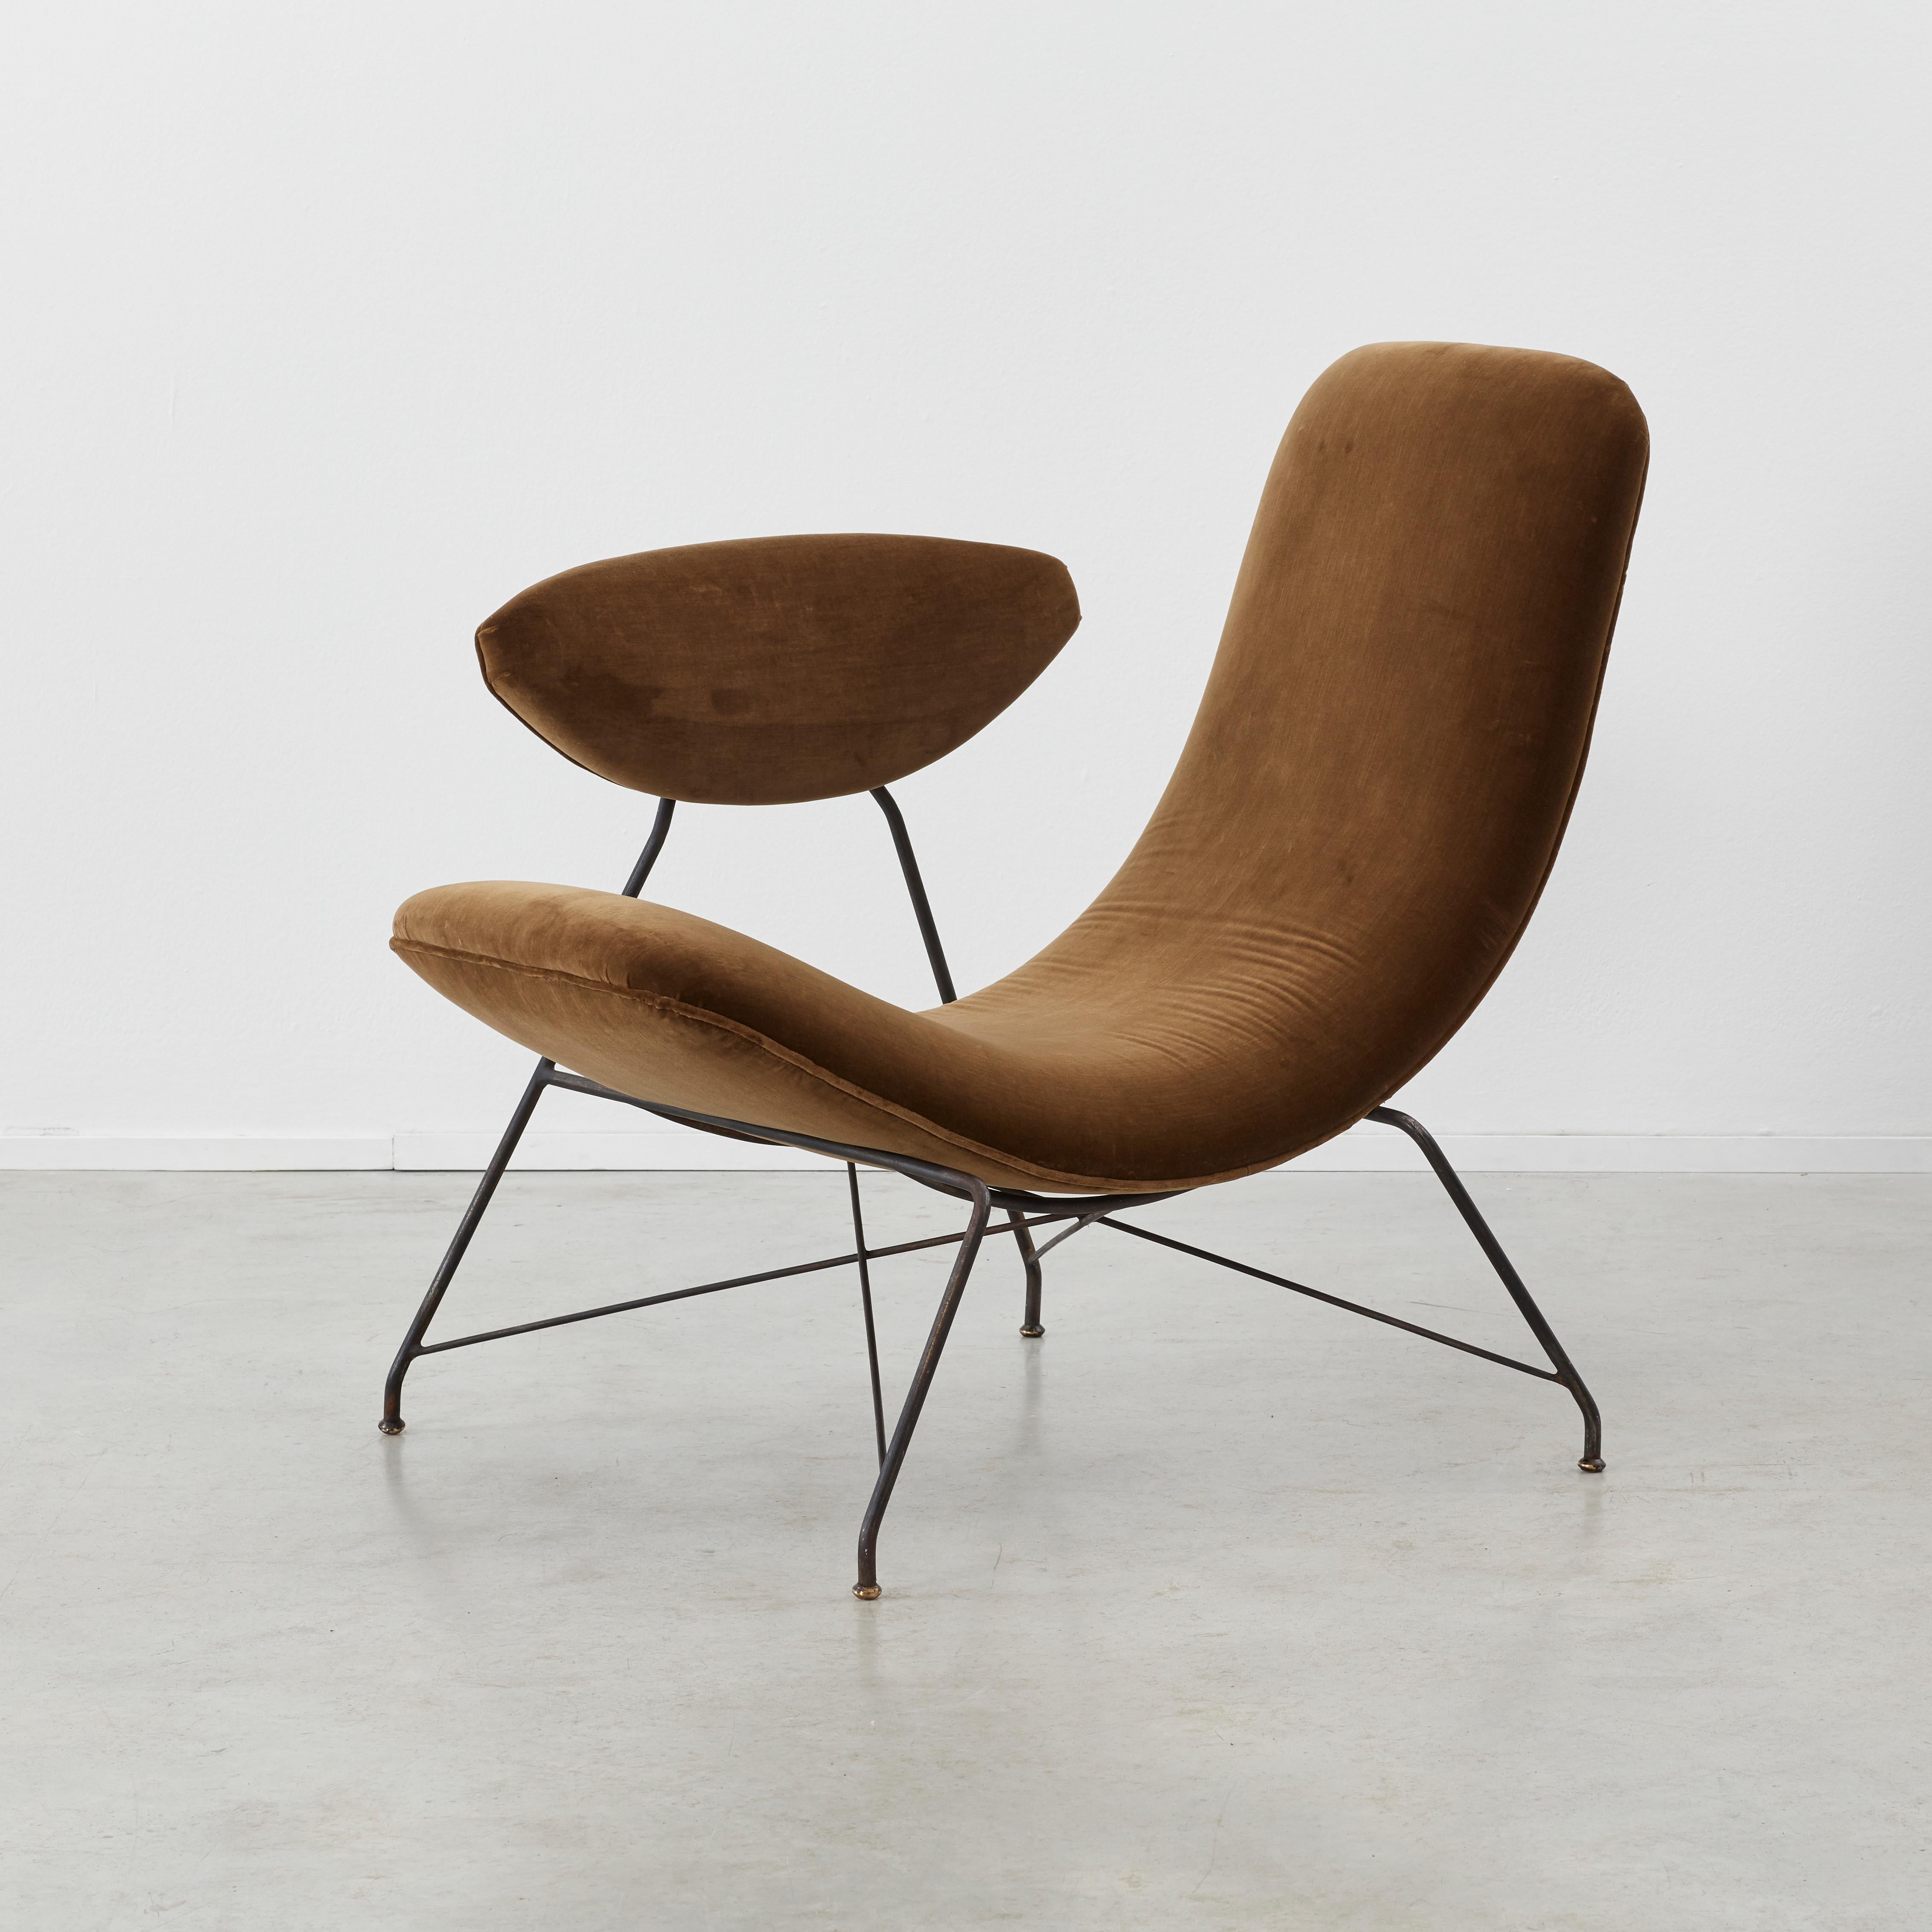 The Reversible chair was designed by Carlo Hauner and Martin Eisler, an Italian-Austrian duo based in Brazil. They co-founded the company Forma Moveis and worked both together and individually on a large number of designs. This particular design is